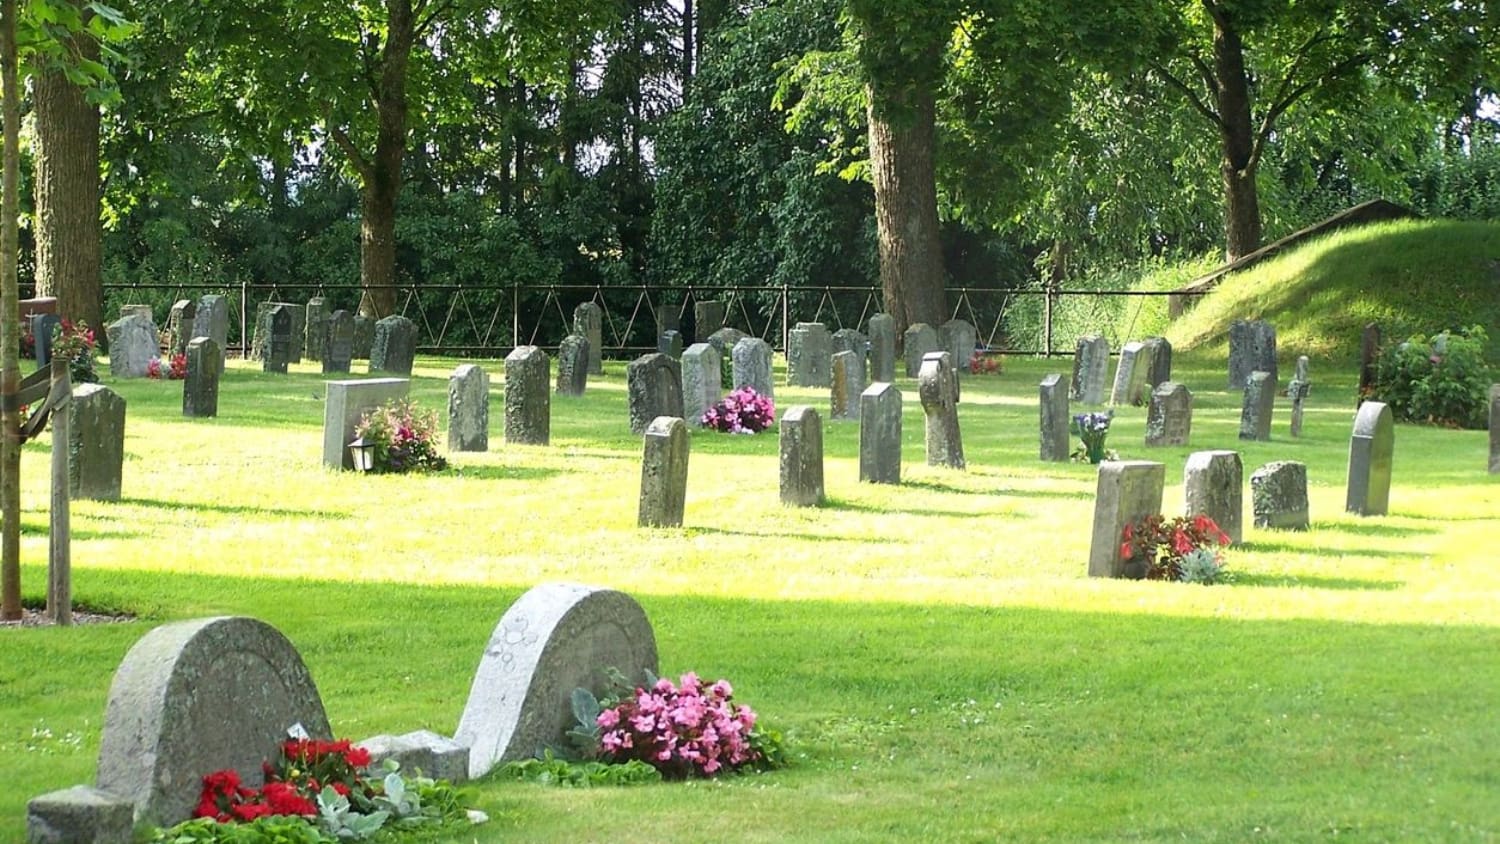 A cemetery with many headstones and flowers on the ground.